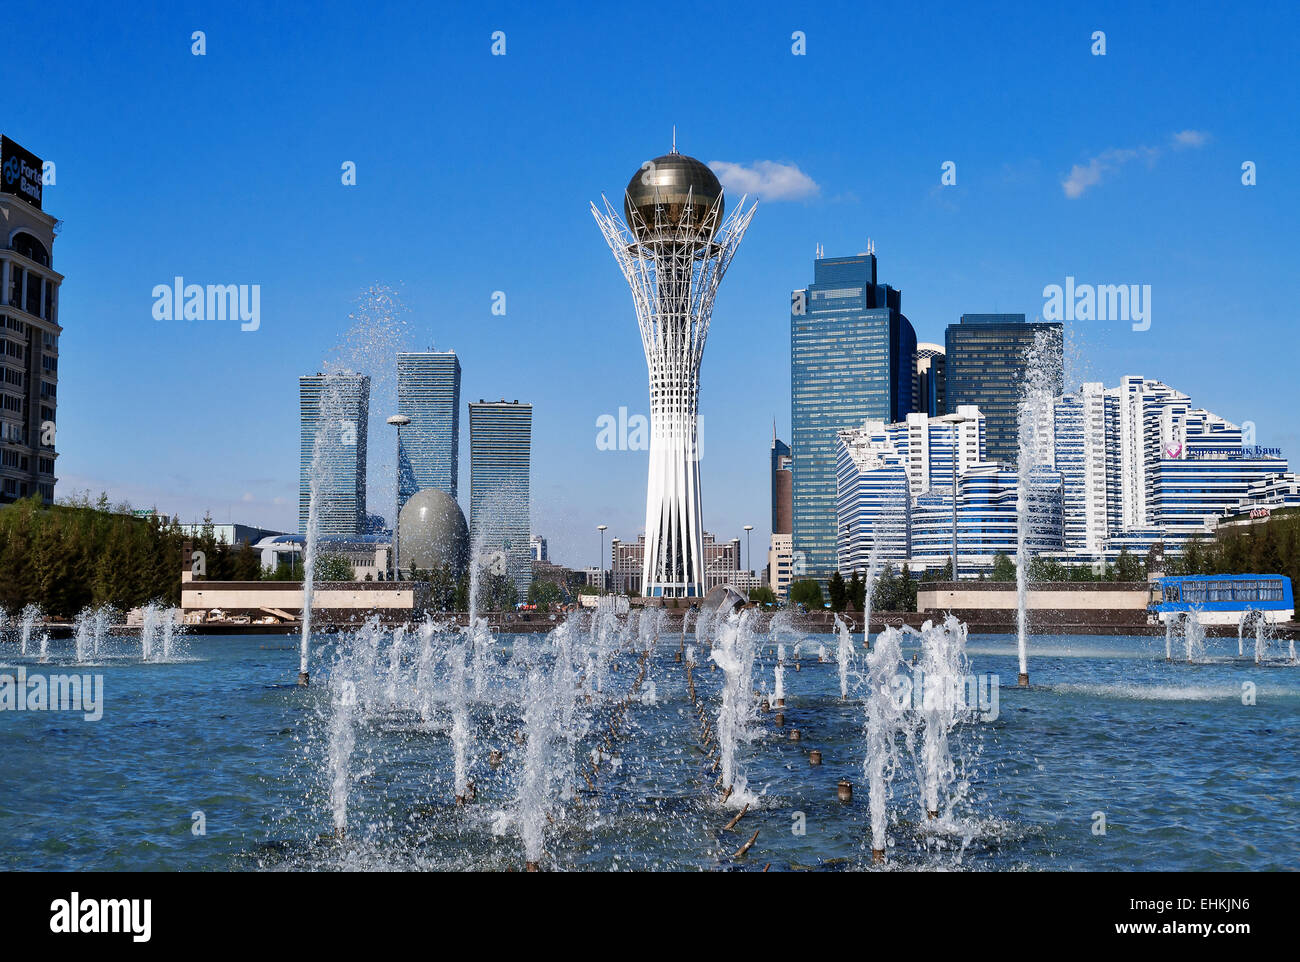 ASTANA, KAZAKHSTAN - MAY 10, 2014: Bayterek is a monument and observation tower in Astana. The height of buildings 105 meters. Stock Photo